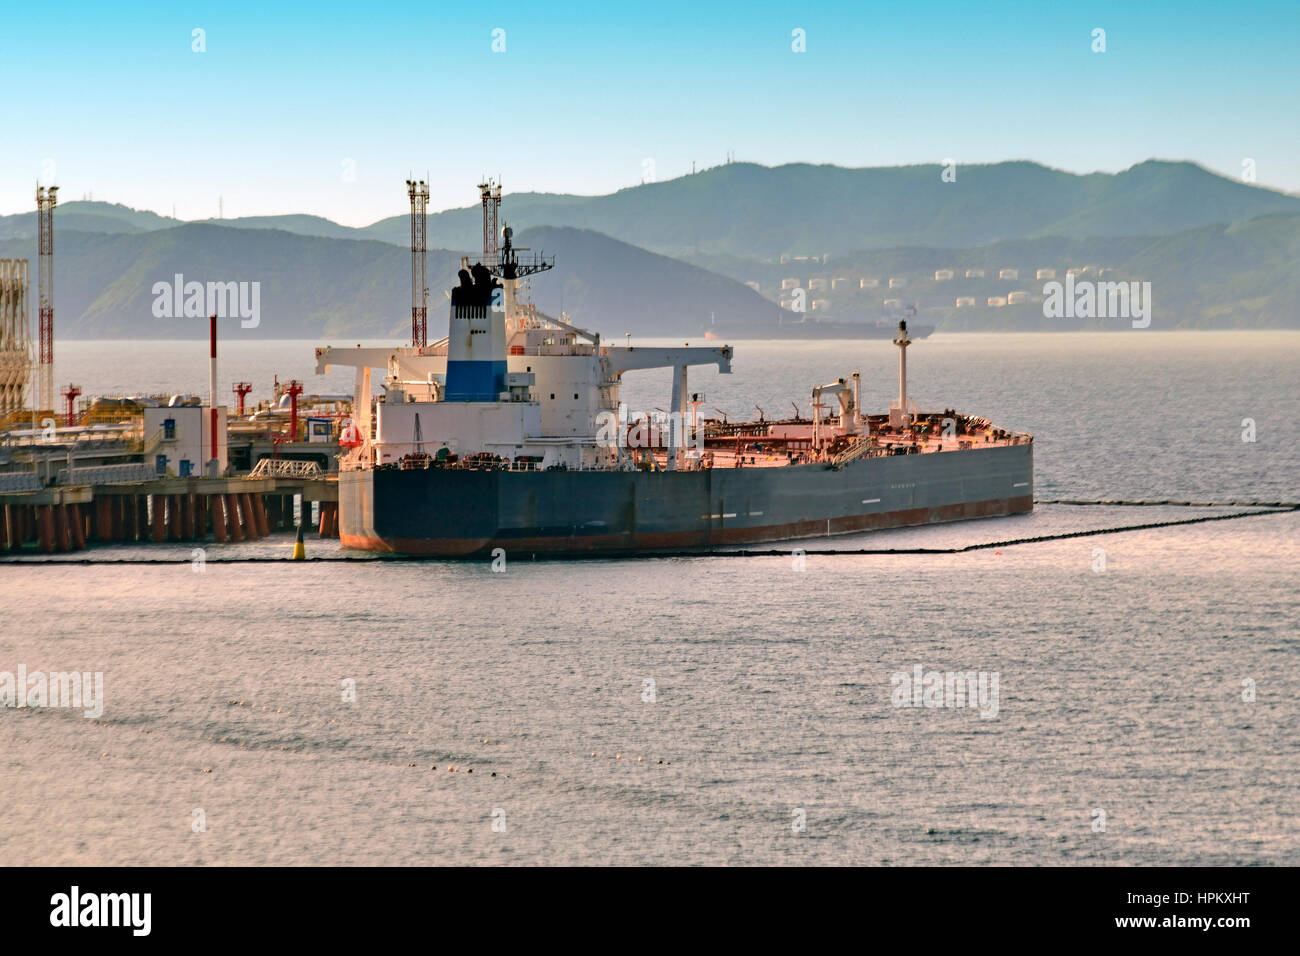 tanker loaded with crude oil at the port, around established security zones Stock Photo